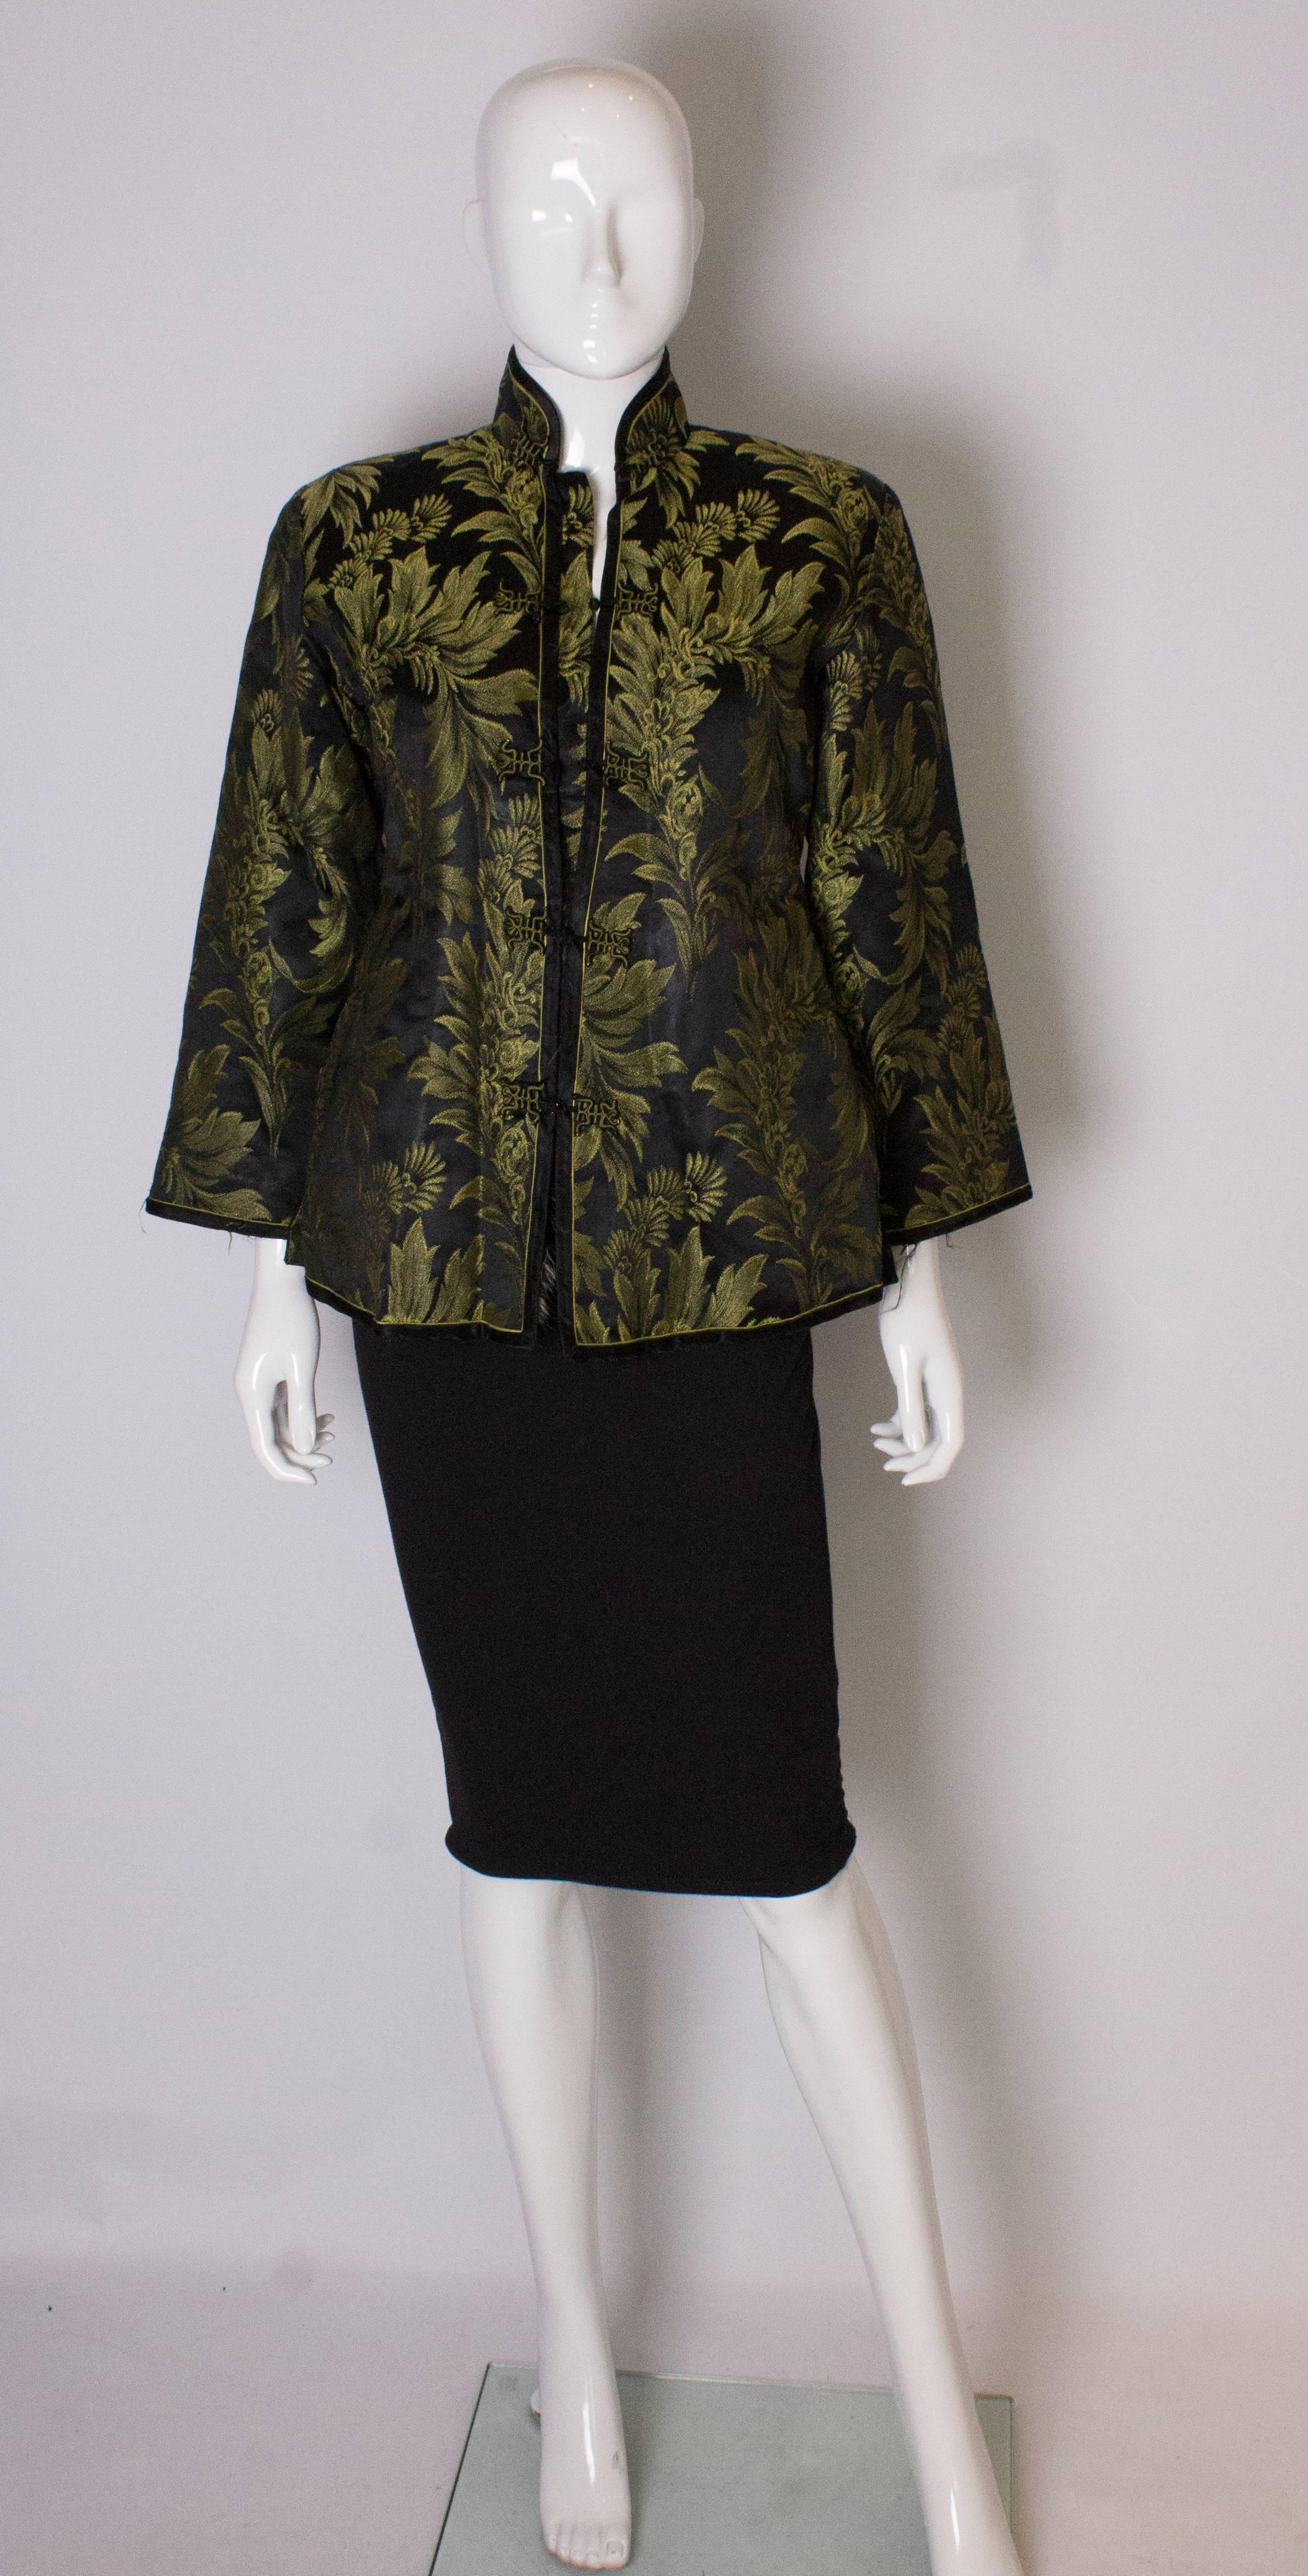 A chic vintage fur lined Chinese jacket. The jacket is in a black silk with yellow/green floral design , and is fur lined. It fastens with toggles, and has 6'' slits at the side.